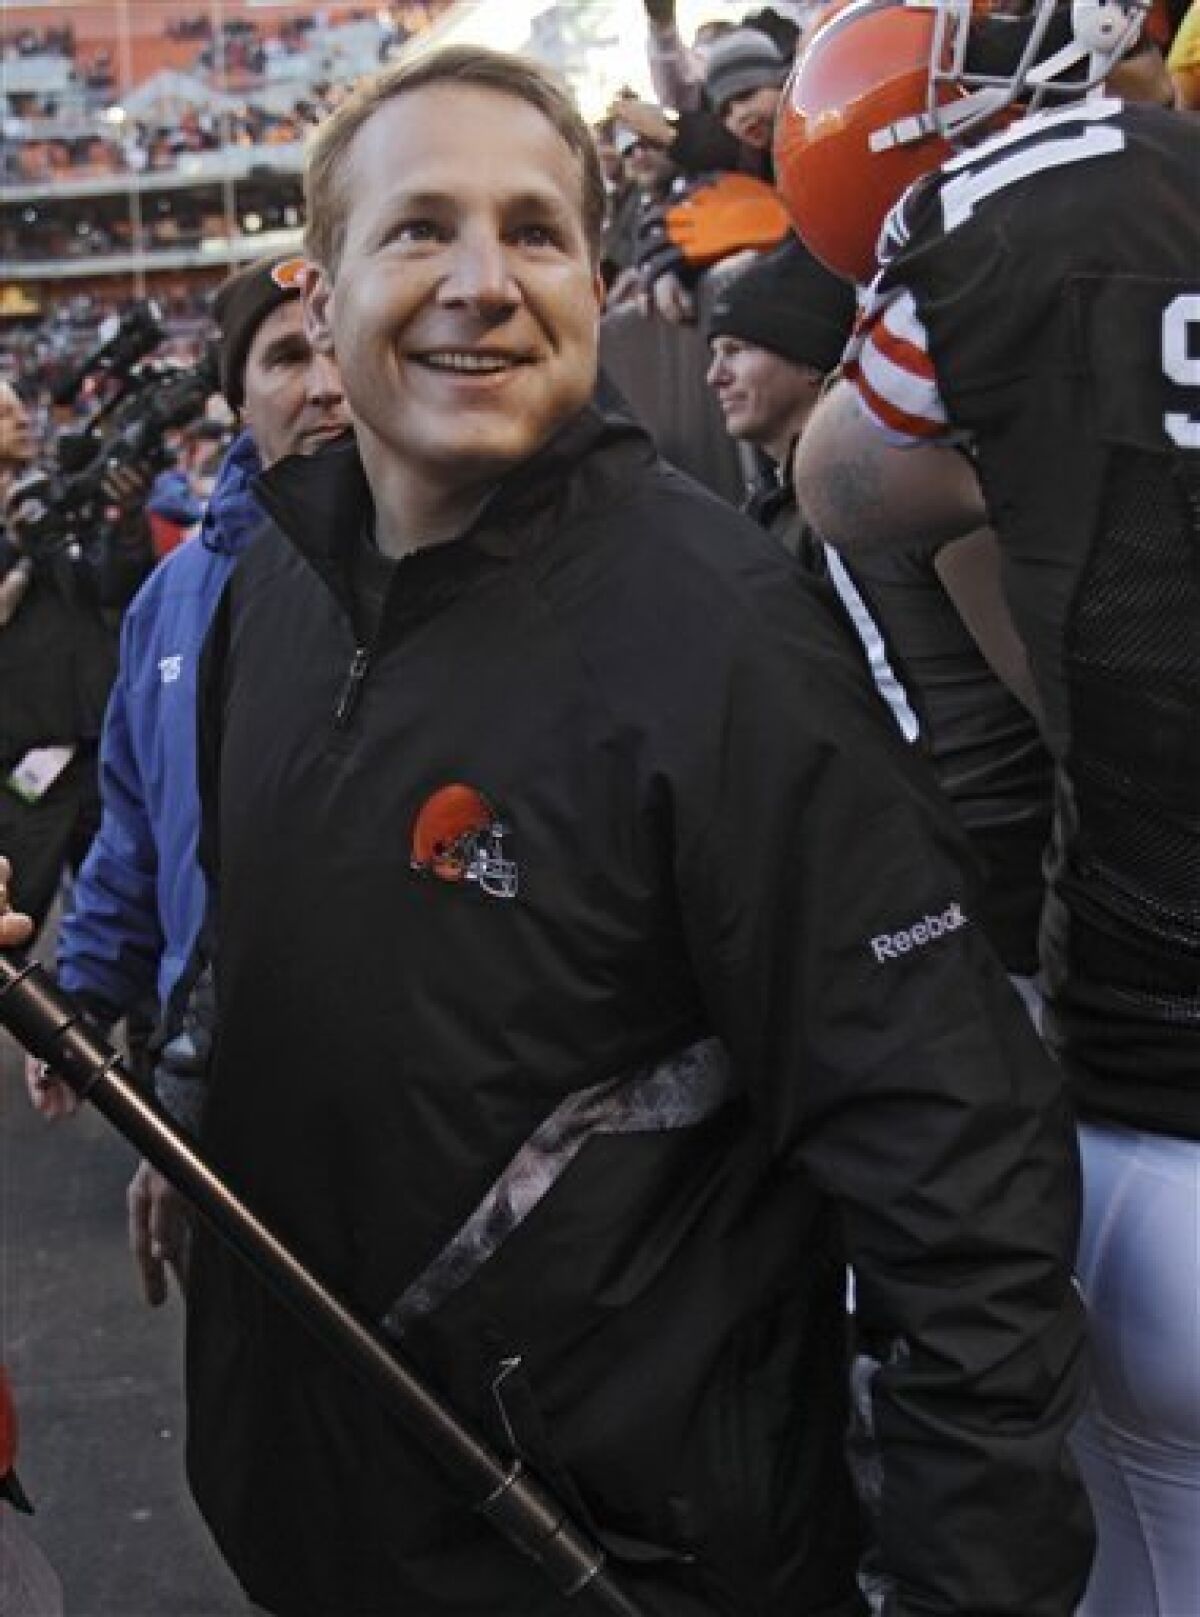 Browns' Mangini faces Jets for first time - The San Diego Union-Tribune